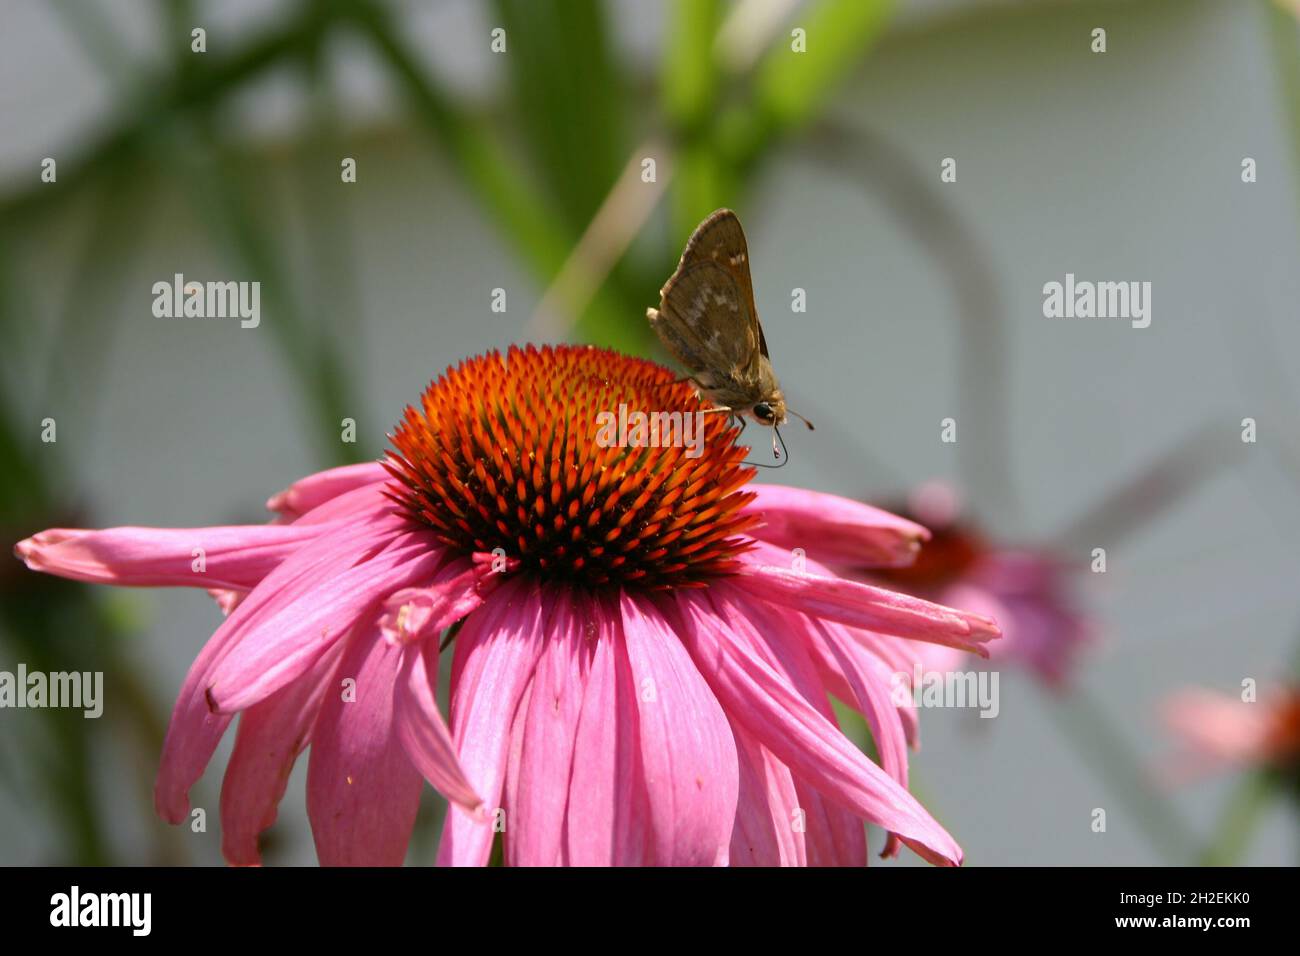 Close up of a brown moth using its delicate proboscus to sip nectar from a brilliantly colored echinacea coneflower Stock Photo